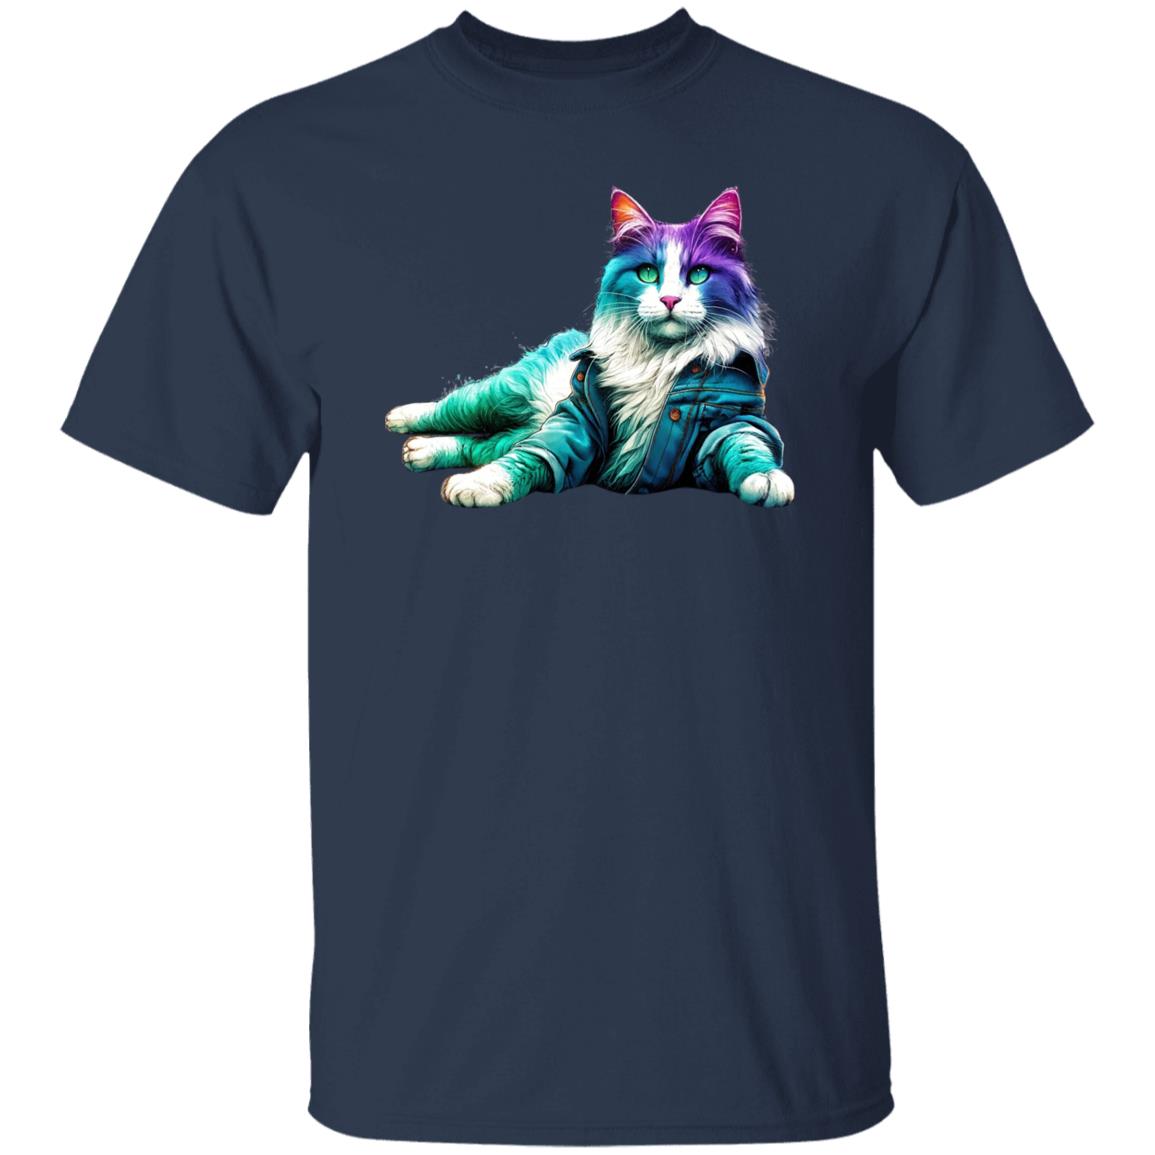 Laying Cat T-Shirt Cool Lazy cat Unisex tee Black Navy Dark Heather-Family-Gift-Planet